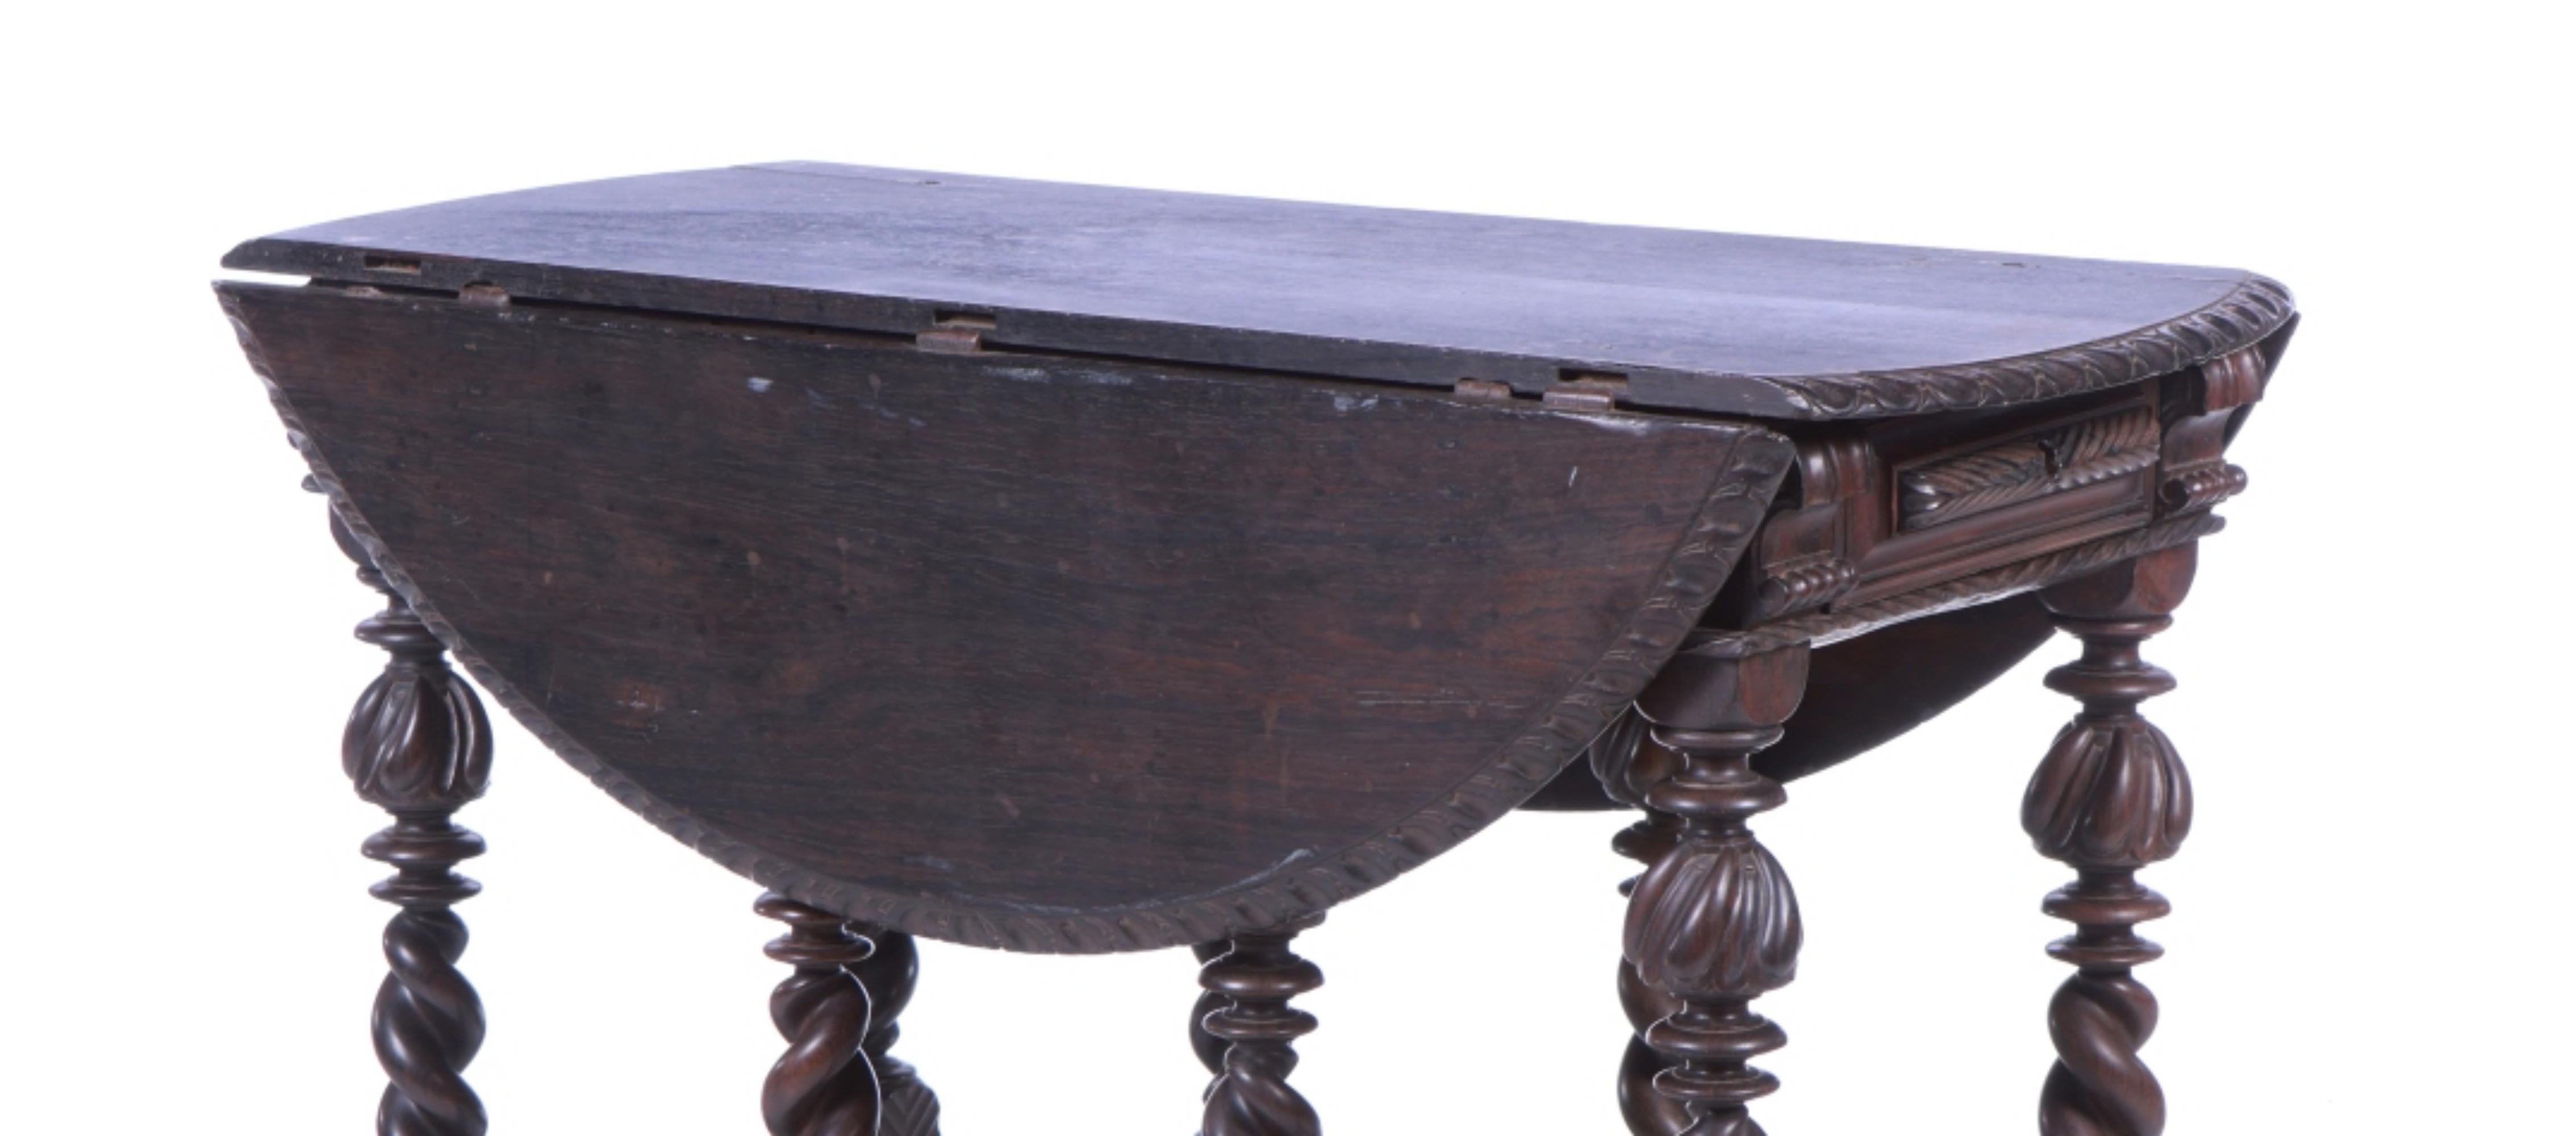 Tab table
Portuguese from the 17th century, in mahogany wood. 
Close: 110cm x 84cm x 53
Good condition.